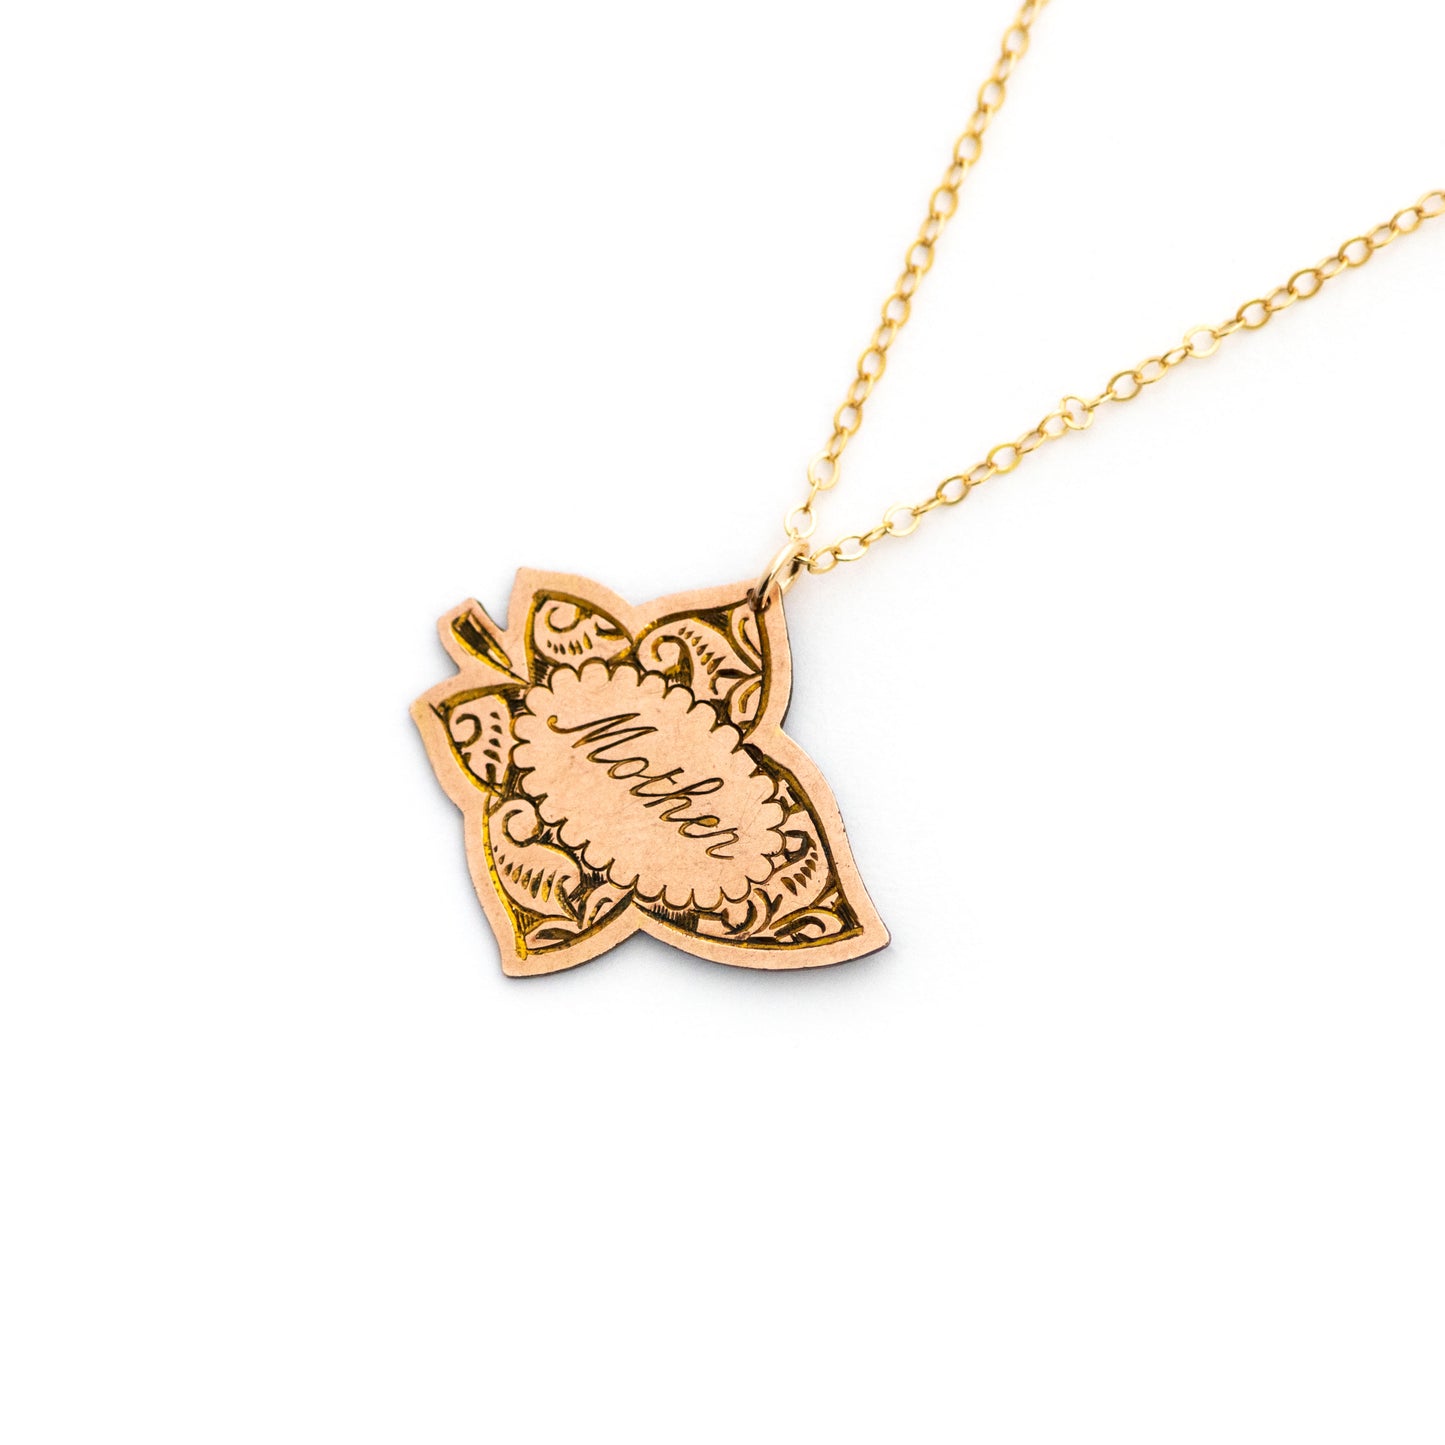 This antique conversion necklace is made up of:  Gold filled Victorian brooch pendant from the late 1800s with hand tooled details. Pendant is in the shape of a leaf and engraved with the word "Mother". Hanging on a simple 14k gold filled chain.